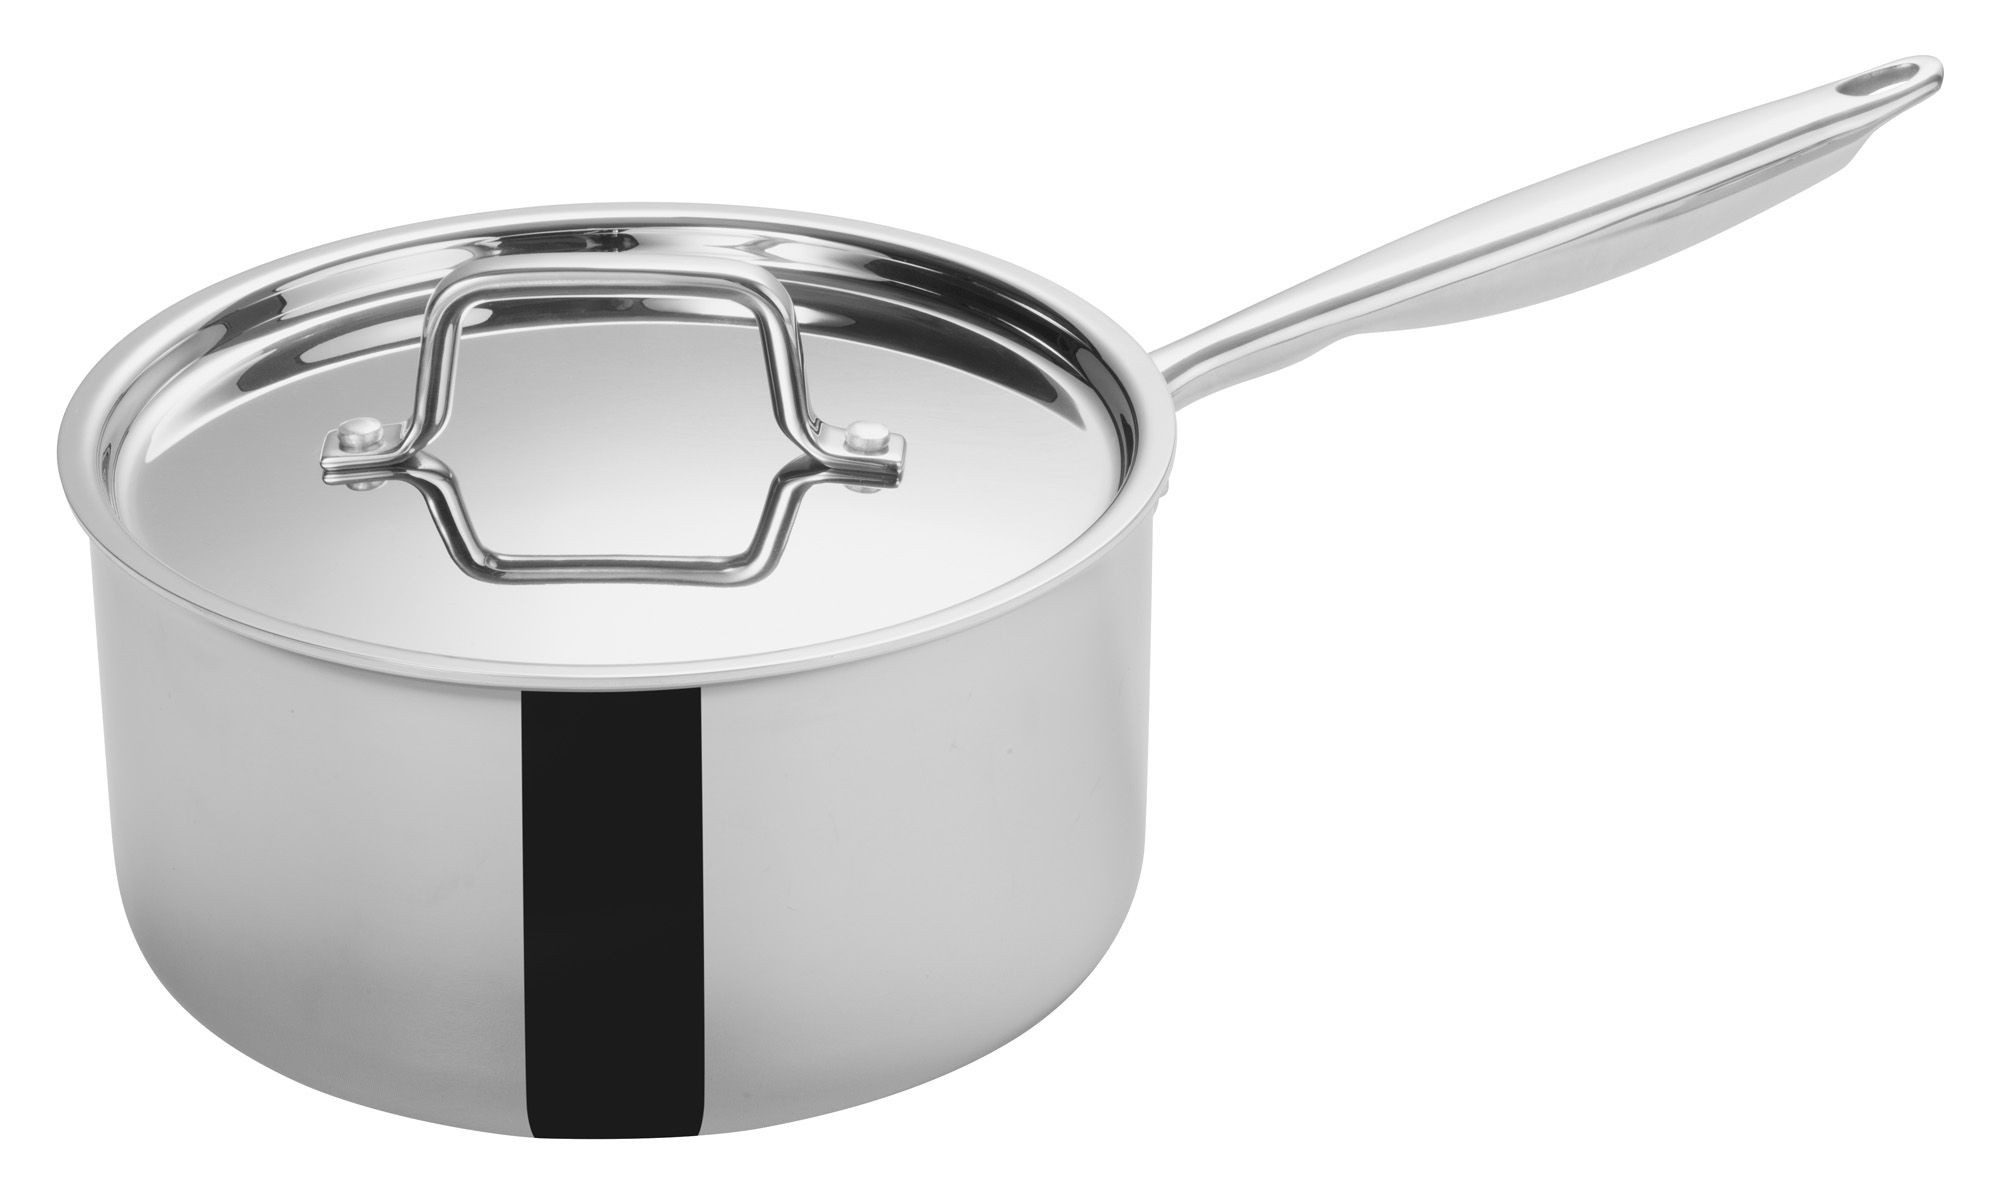 Winco TGAP-5 Tri-Ply Stainless Steel 4.5 Qt. Sauce Pan with Cover